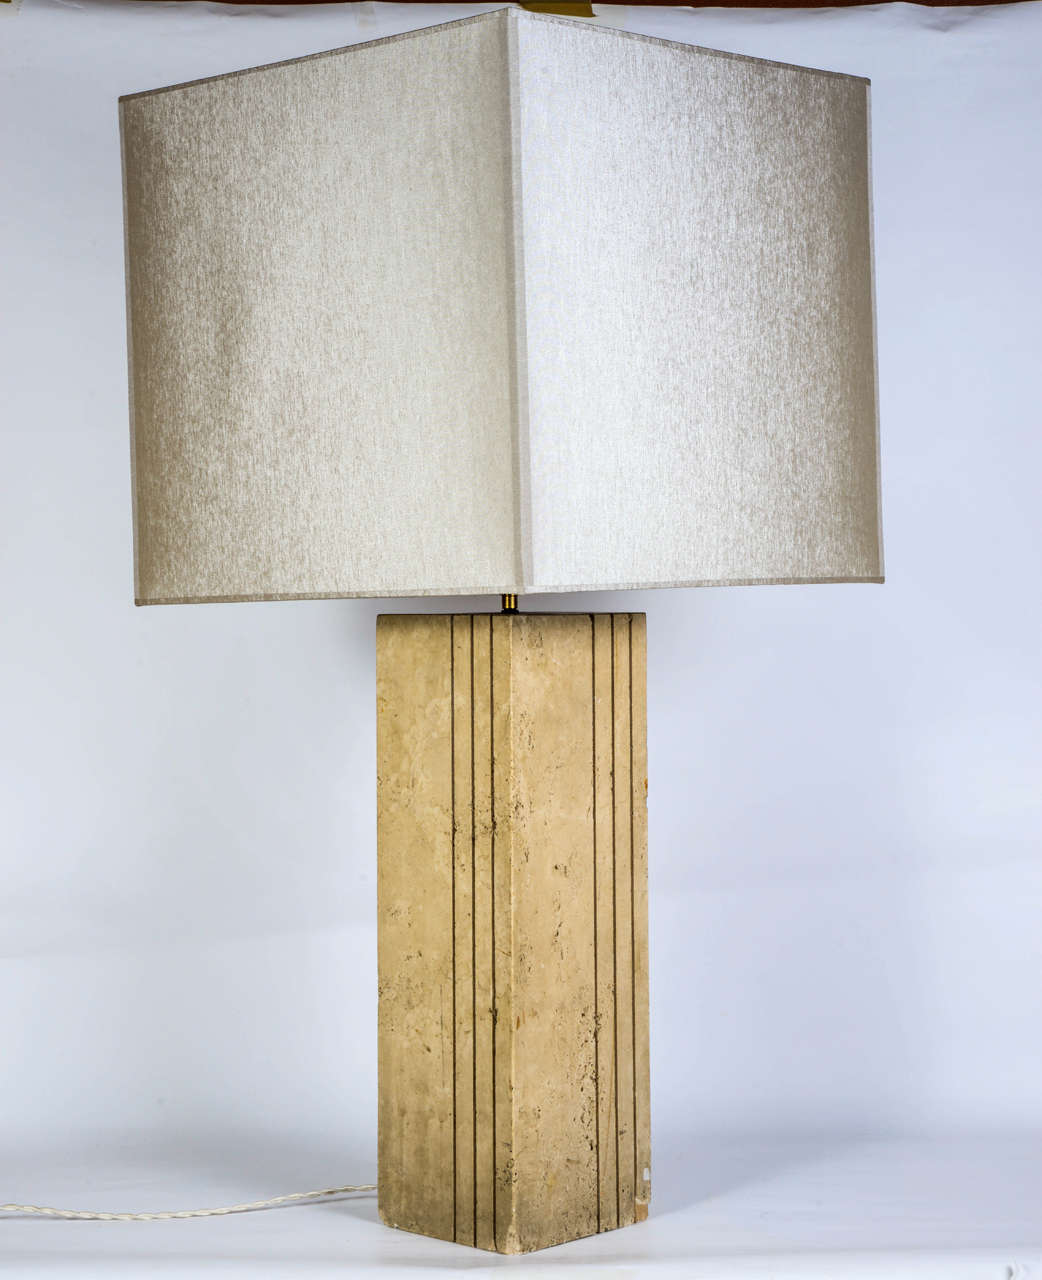 1930s stone table lamp with fluted right angles. New lamp shade in beige grey silk and new wiring. In the style of Marc Duplantier.

Lamp dimension:

- Height with lampshade 88cm
- Height without lampshade 48cm